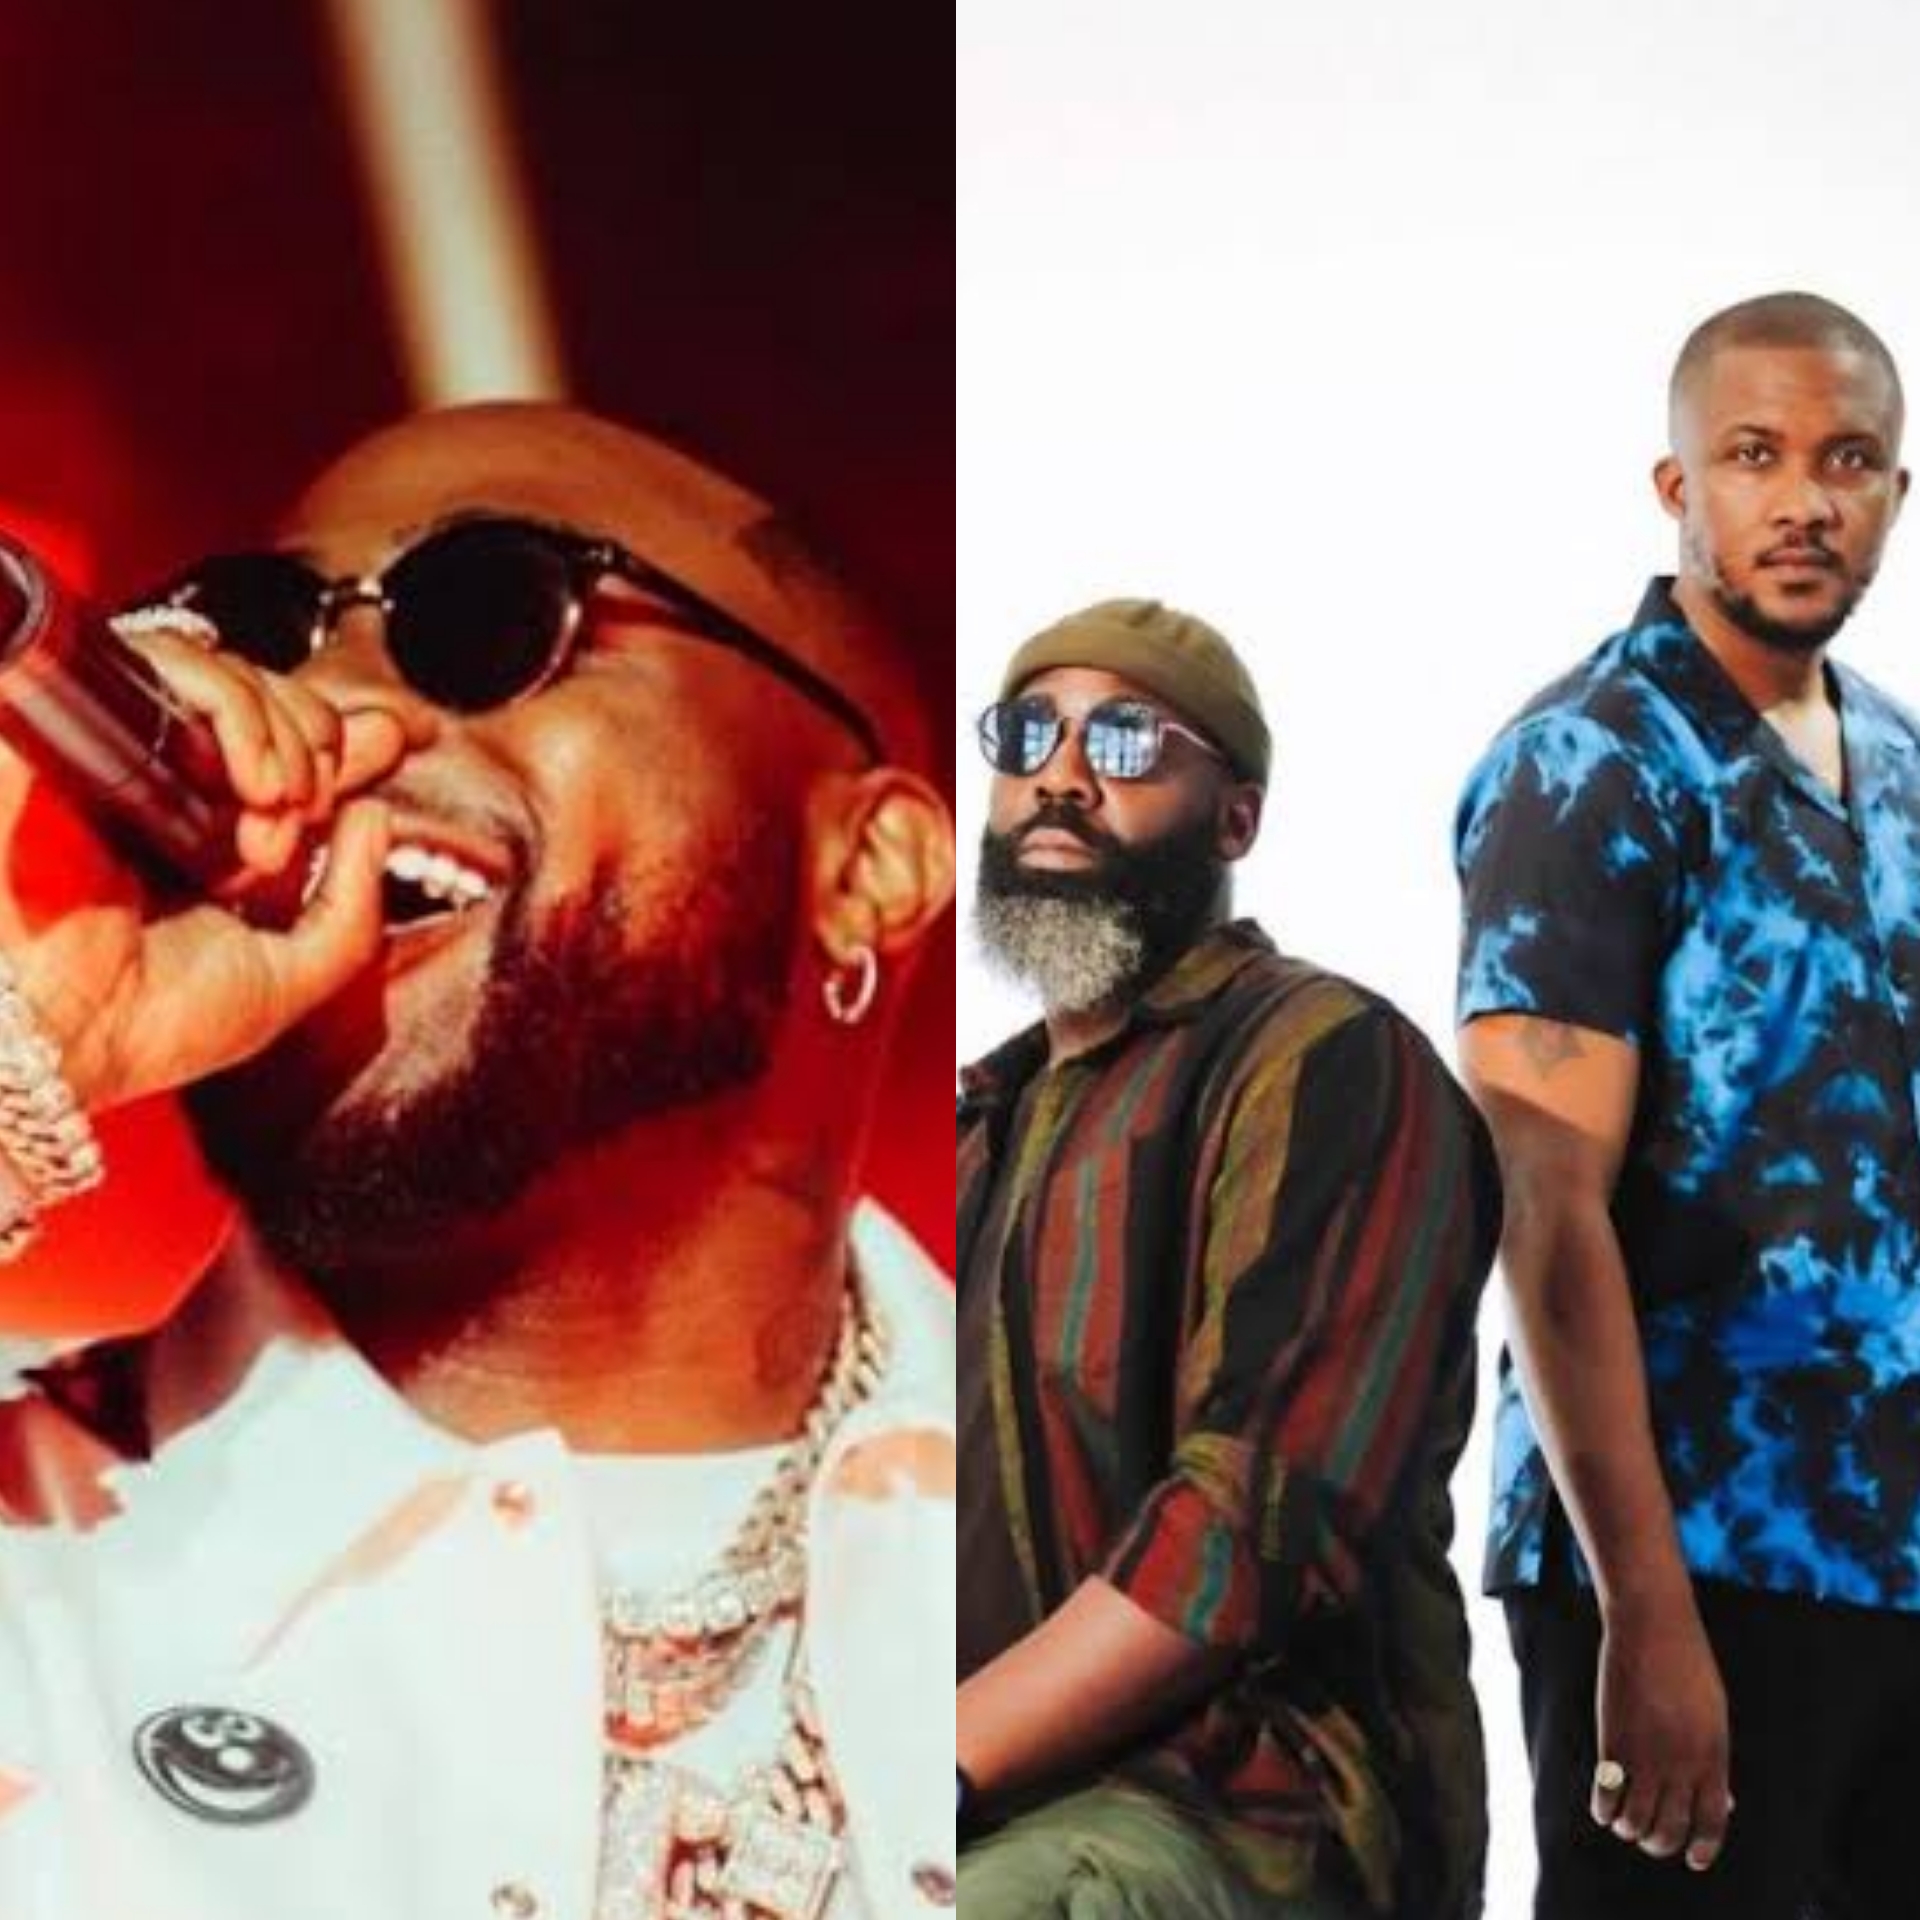 Show Dem Camp (SDC) Wows Fans at London’s Palmwine Fest with Surprise Guest Performance by Davido